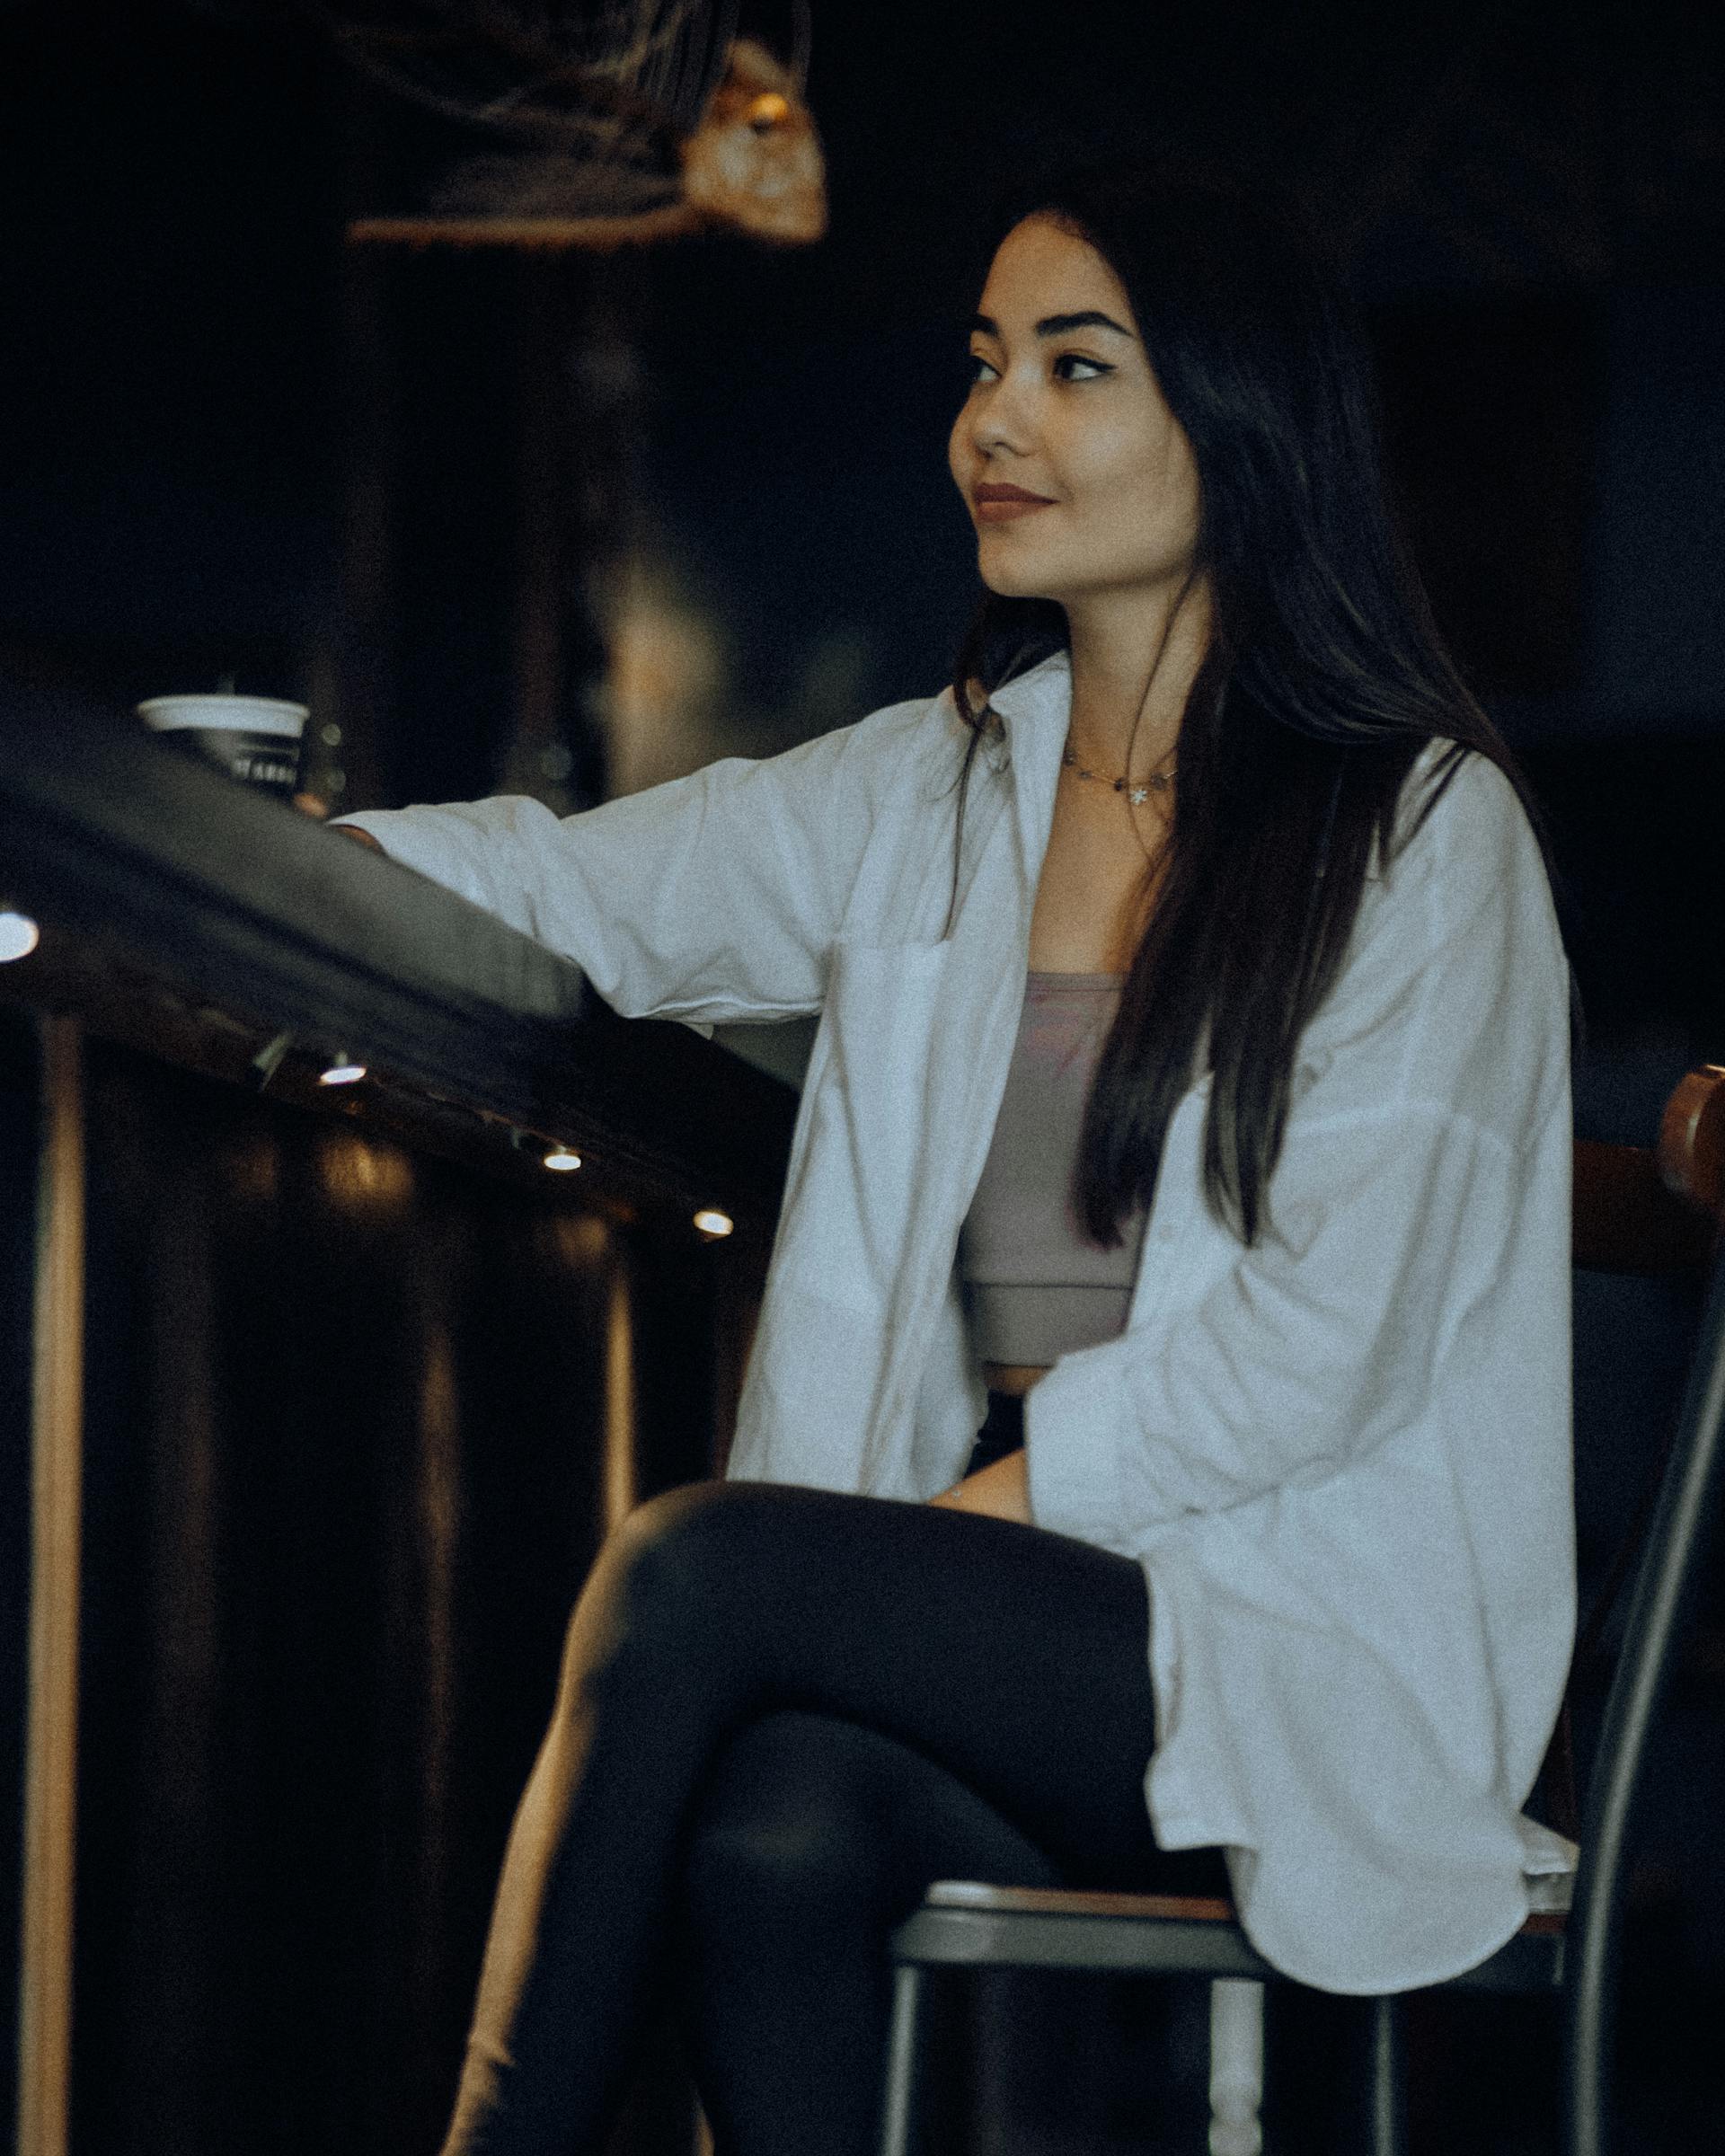 A woman sitting in a bar | Source: Pexels